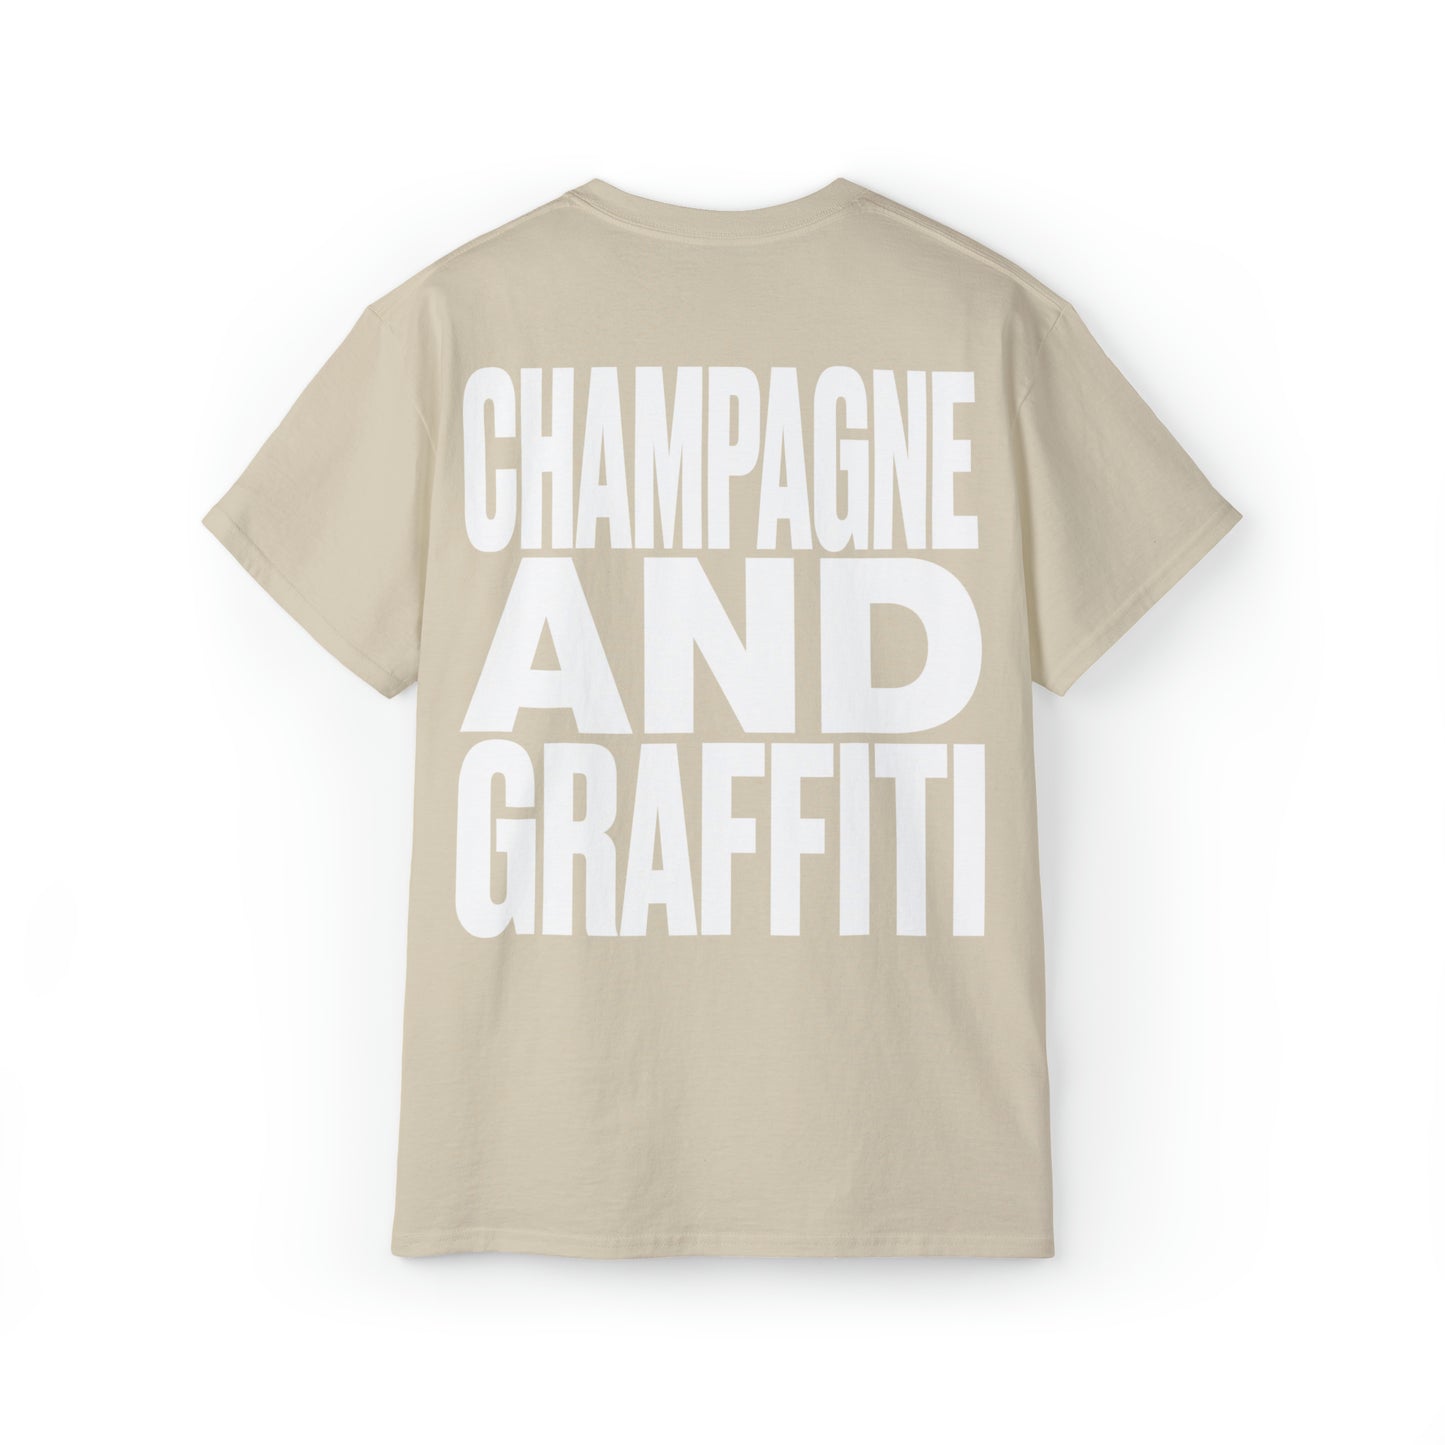 the CHAMPAGNE AND GRAFFITI tee